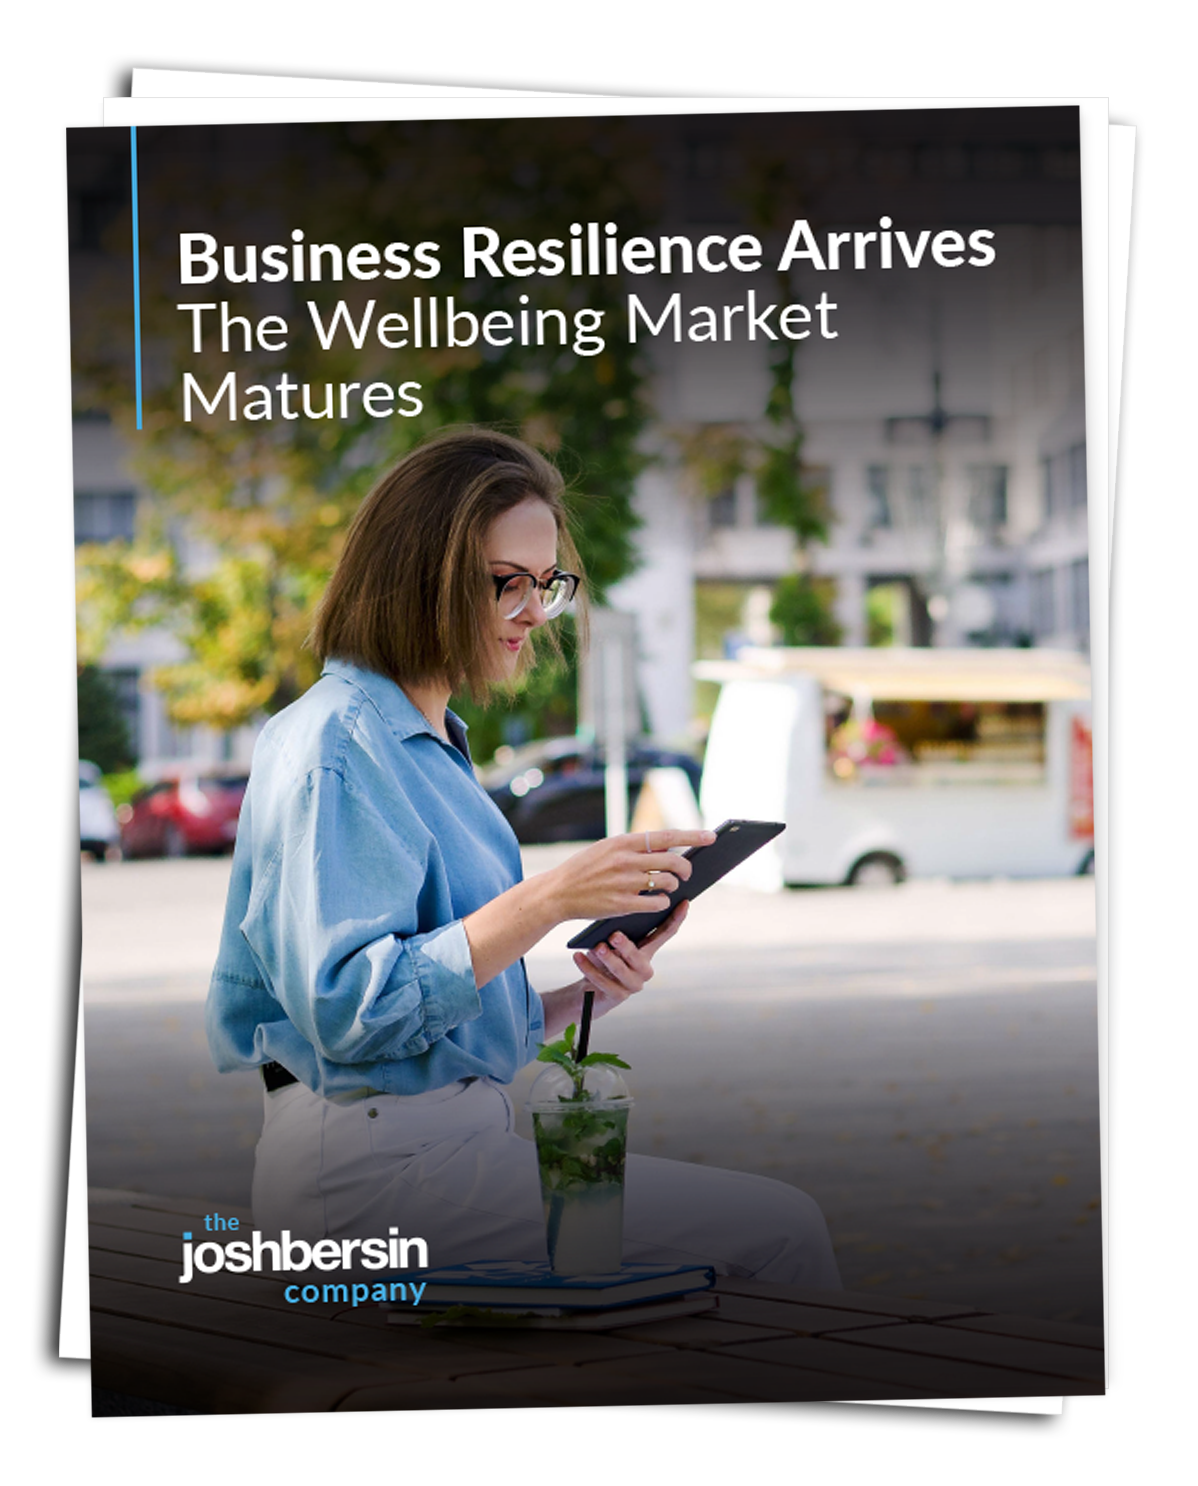 Business Resilience Arrives: The Wellbeing Market Matures